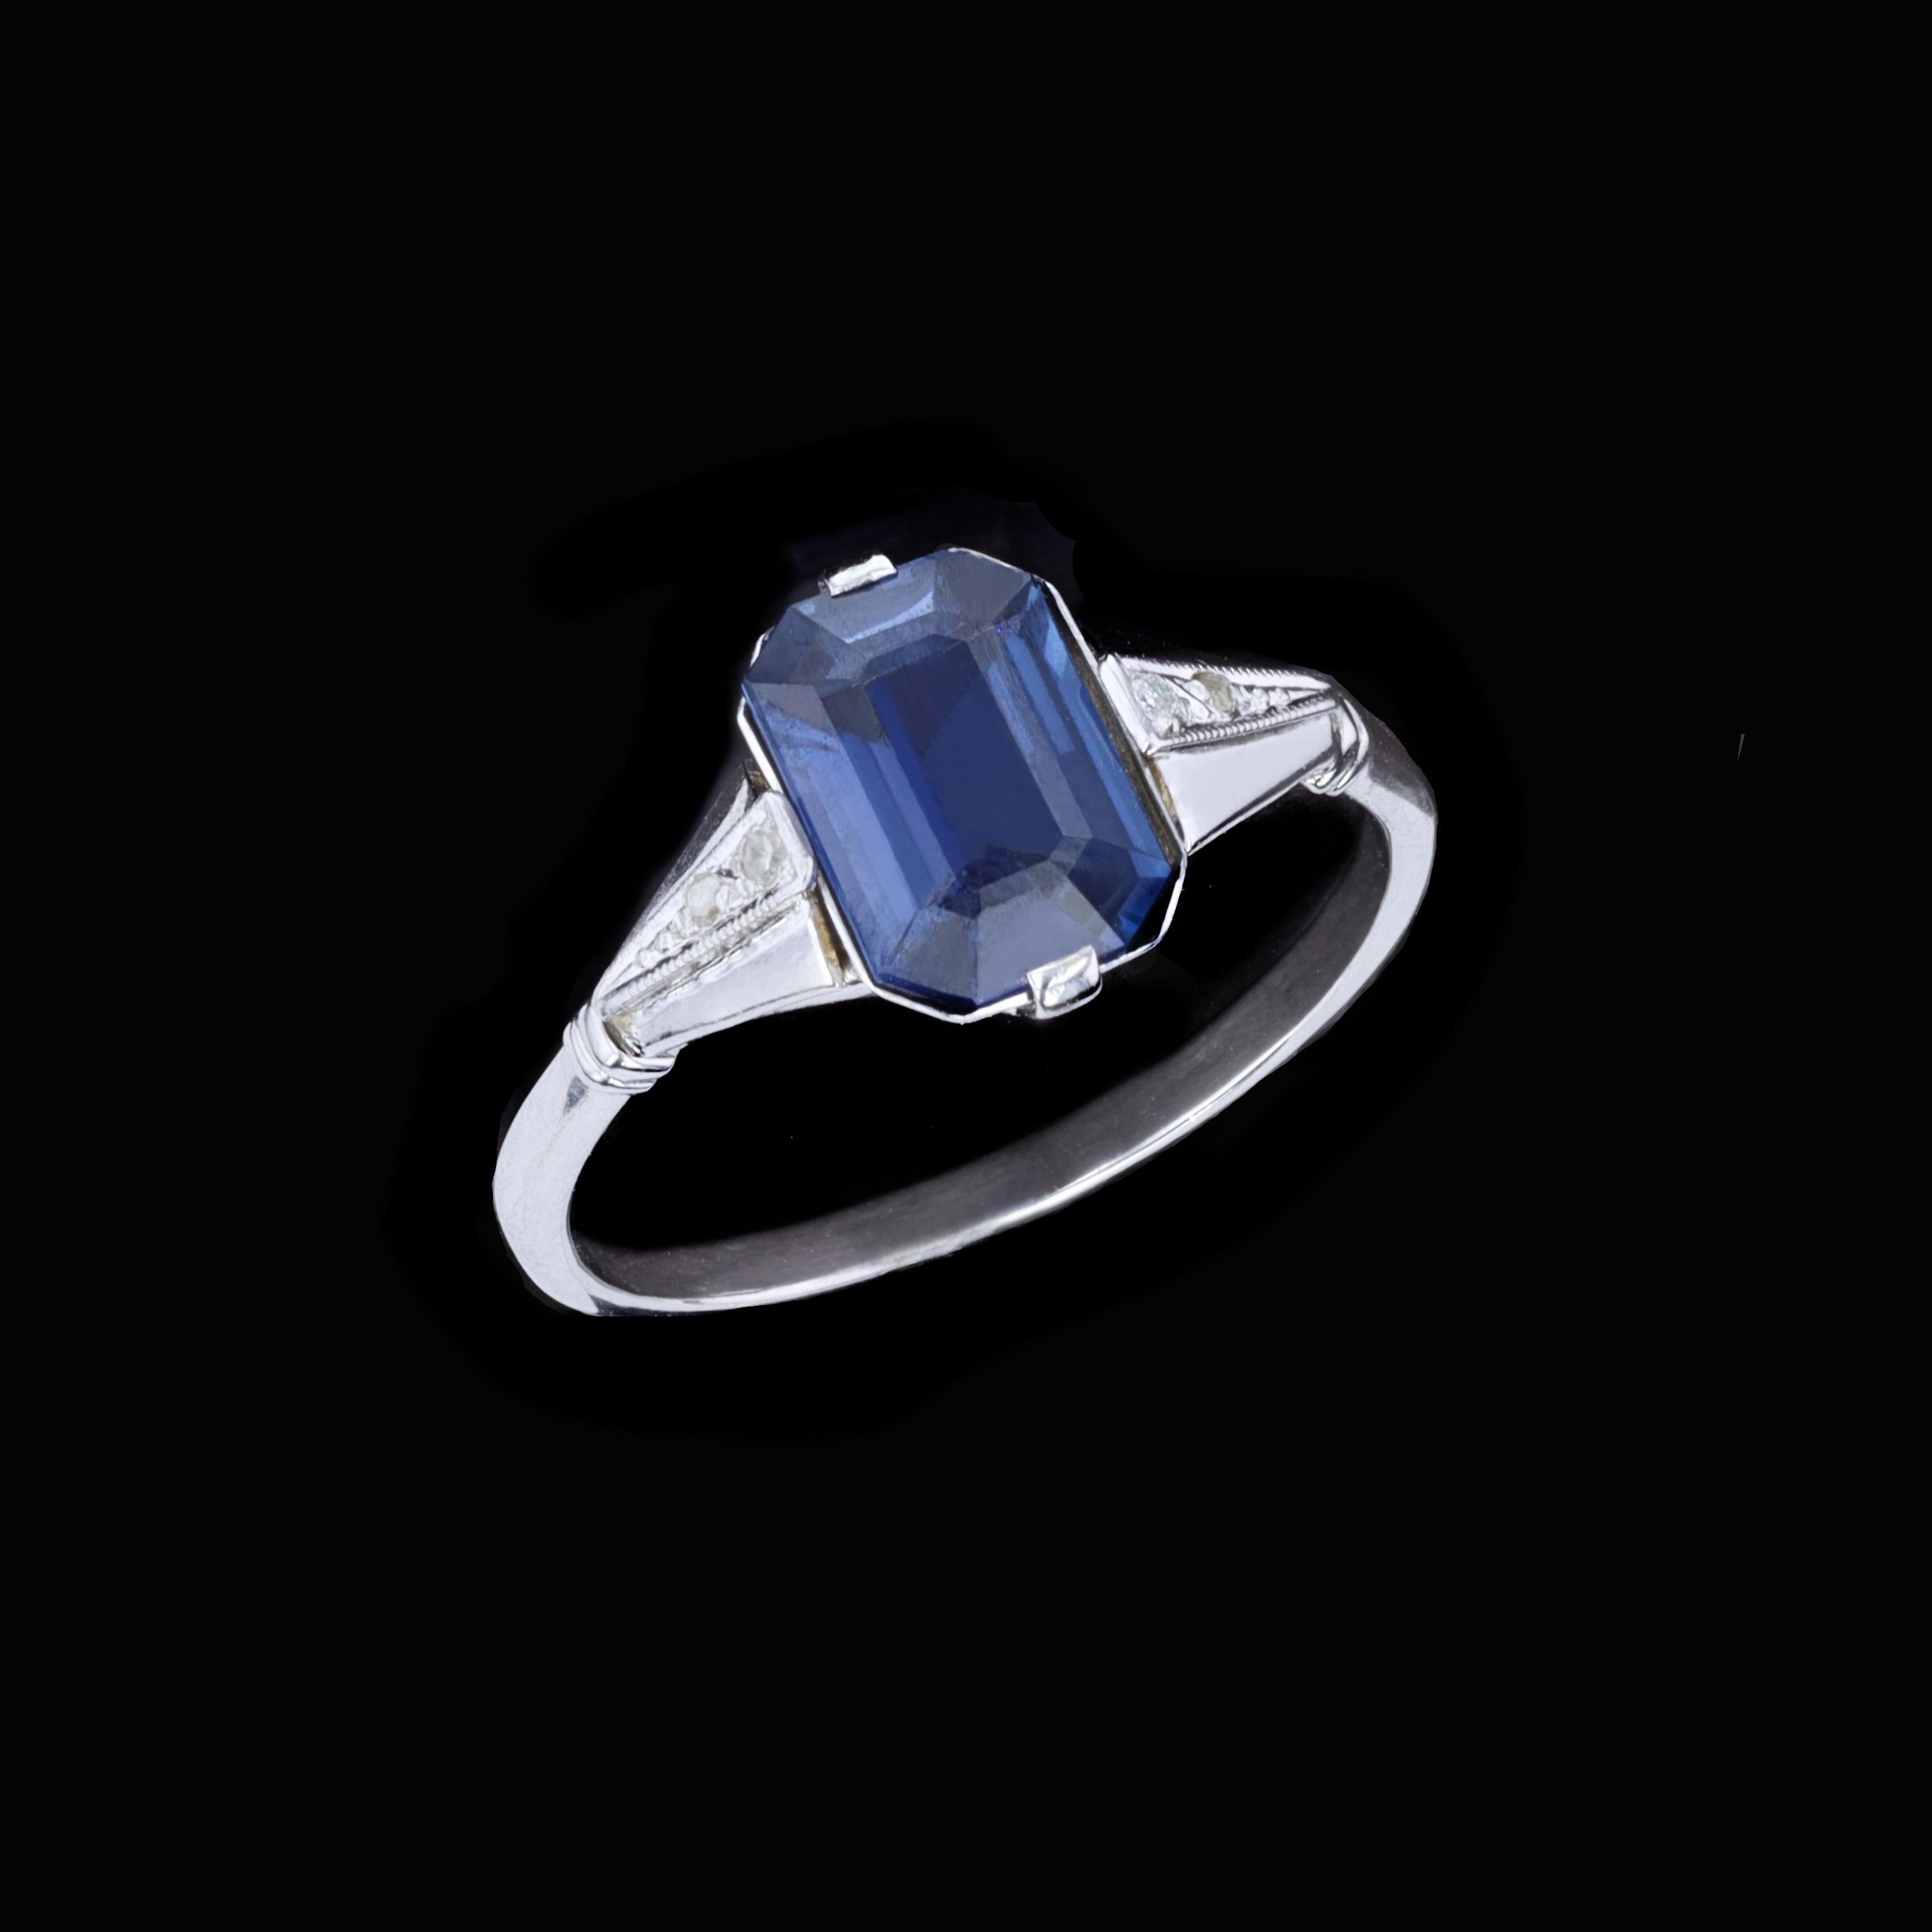 Centered with an emerald cut sapphire and flanked by a pair of round diamonds, this ring is a statement piece for the true romantic. The three stone ring features an Emerald Cut Sapphire weighing 1.79CT ctw And 2 Round Diamonds weighing 0.04TWT ctw.